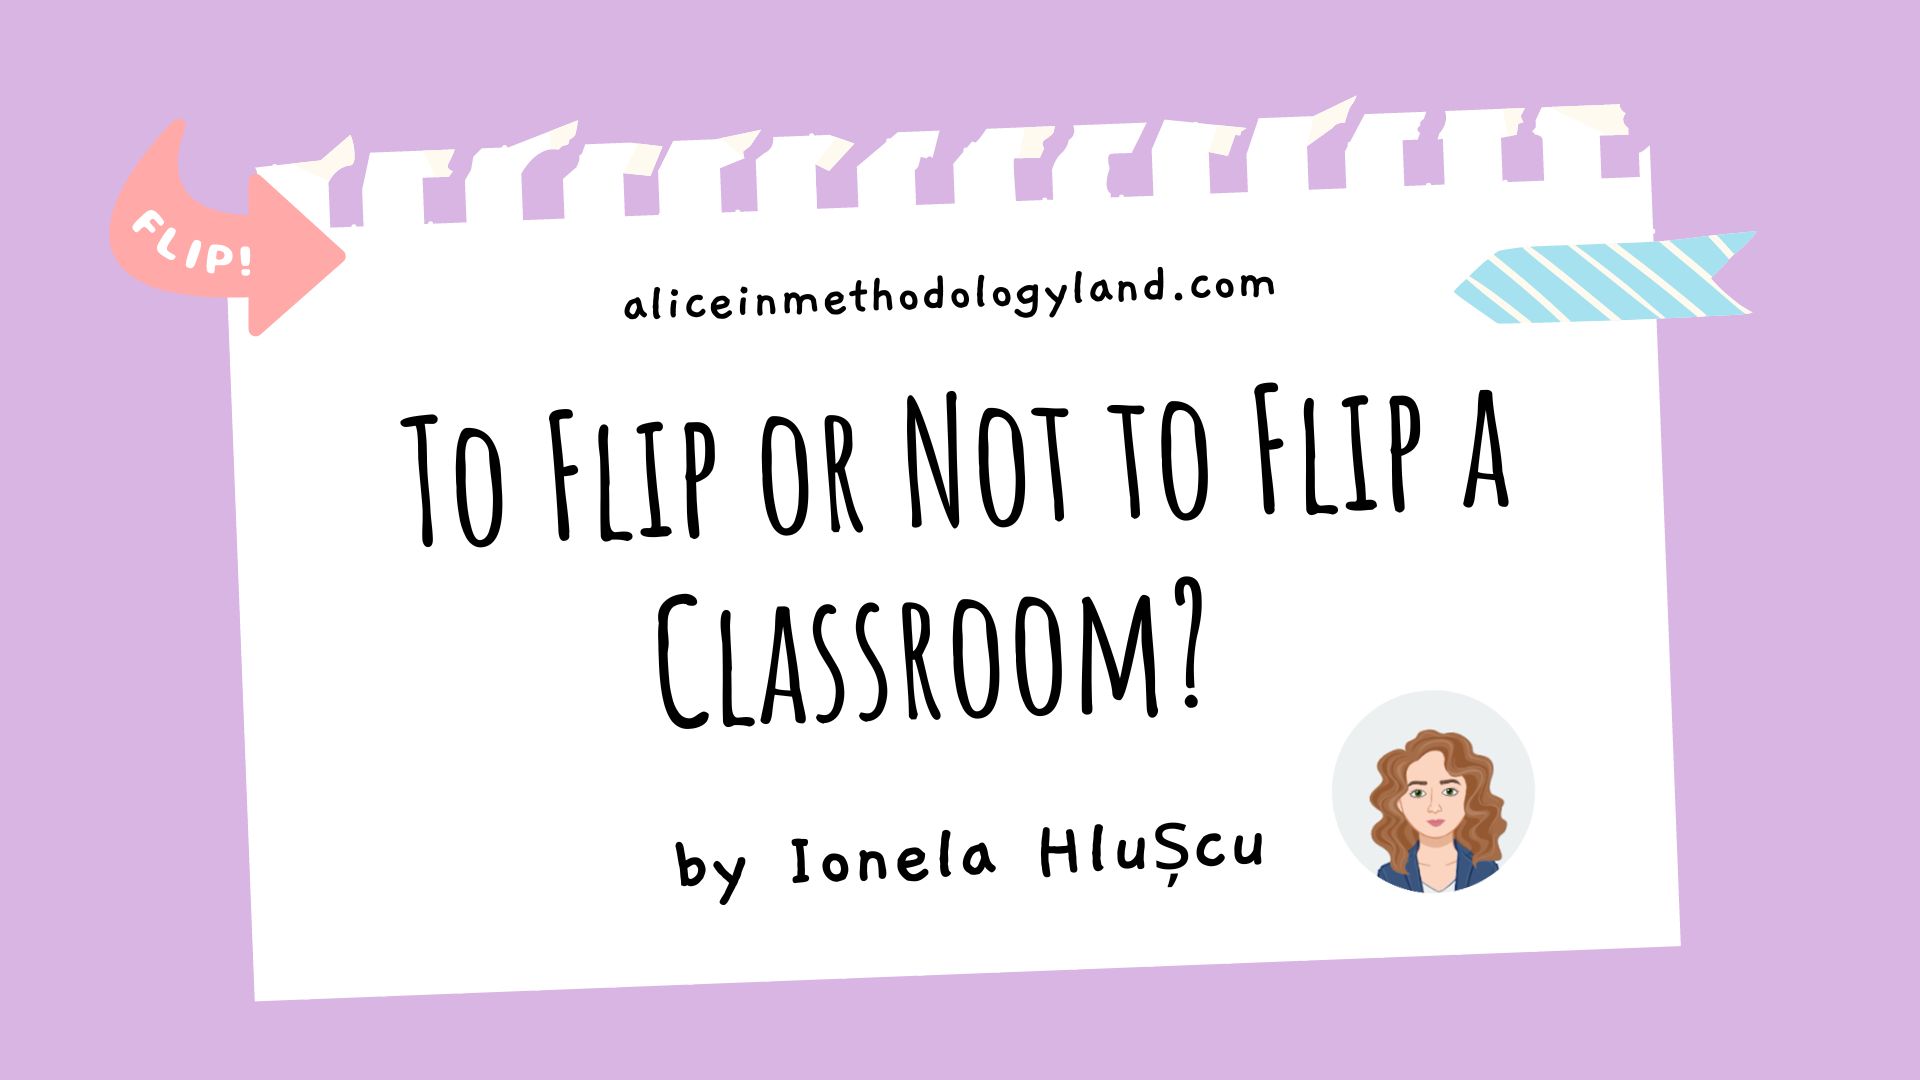 To Flip or Not to Flip a Classroom? by Ionela Hlușcu